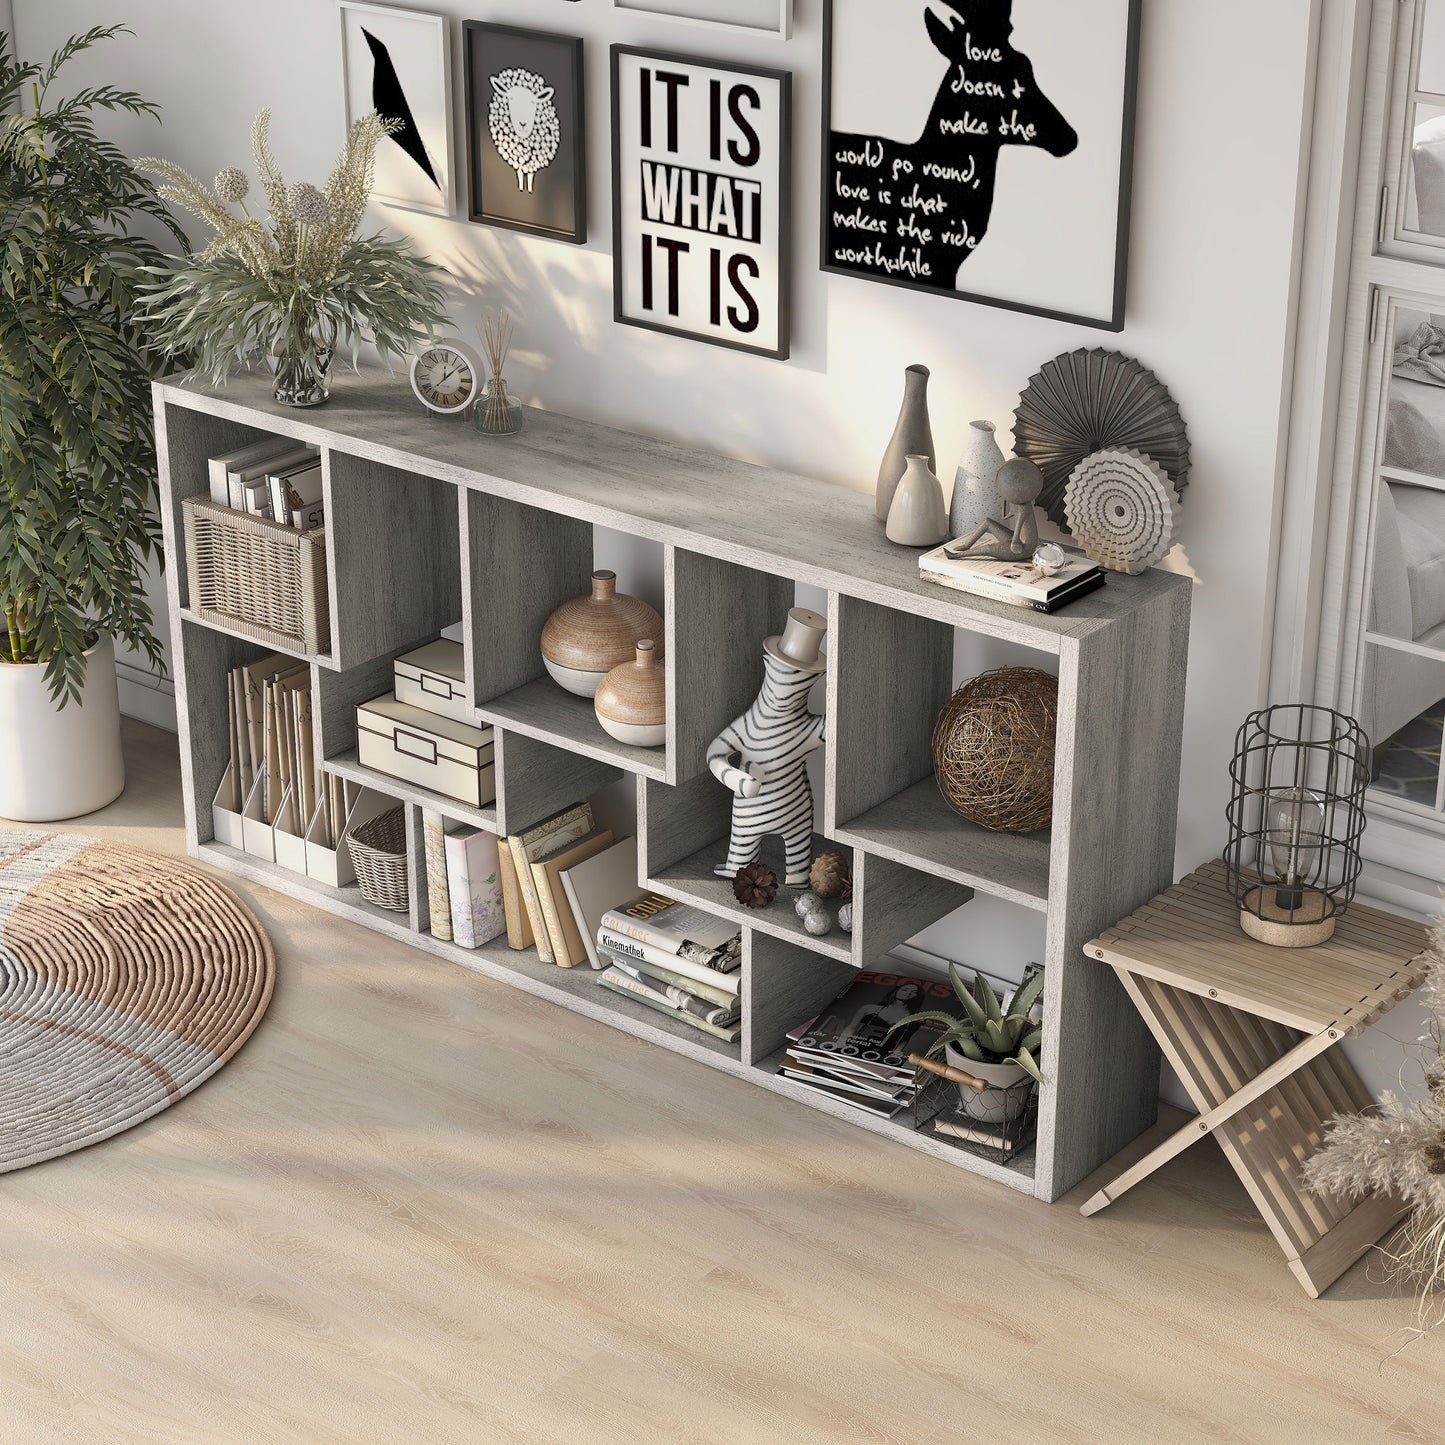 Left angled horizontal modern vintage gray oak geometric open display bookcase in a living room with accessories